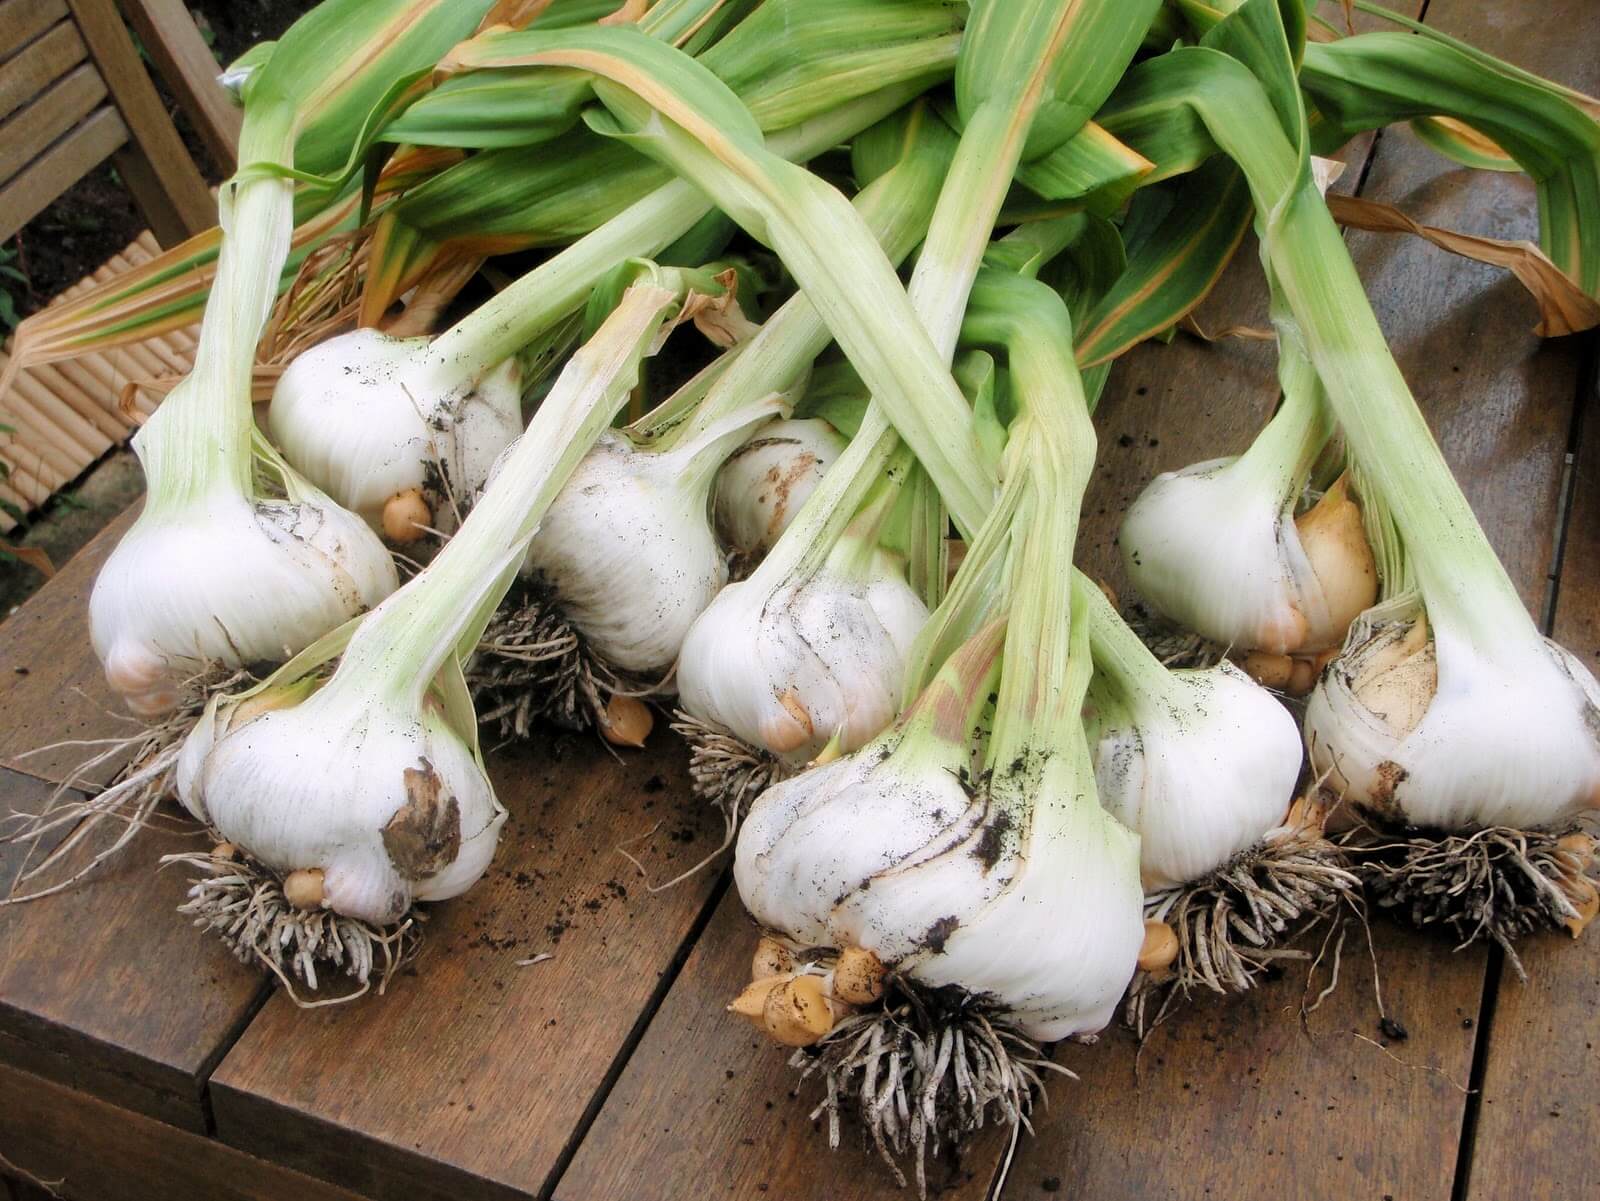 How to Plant and Grow Garlic - Plant Instructions